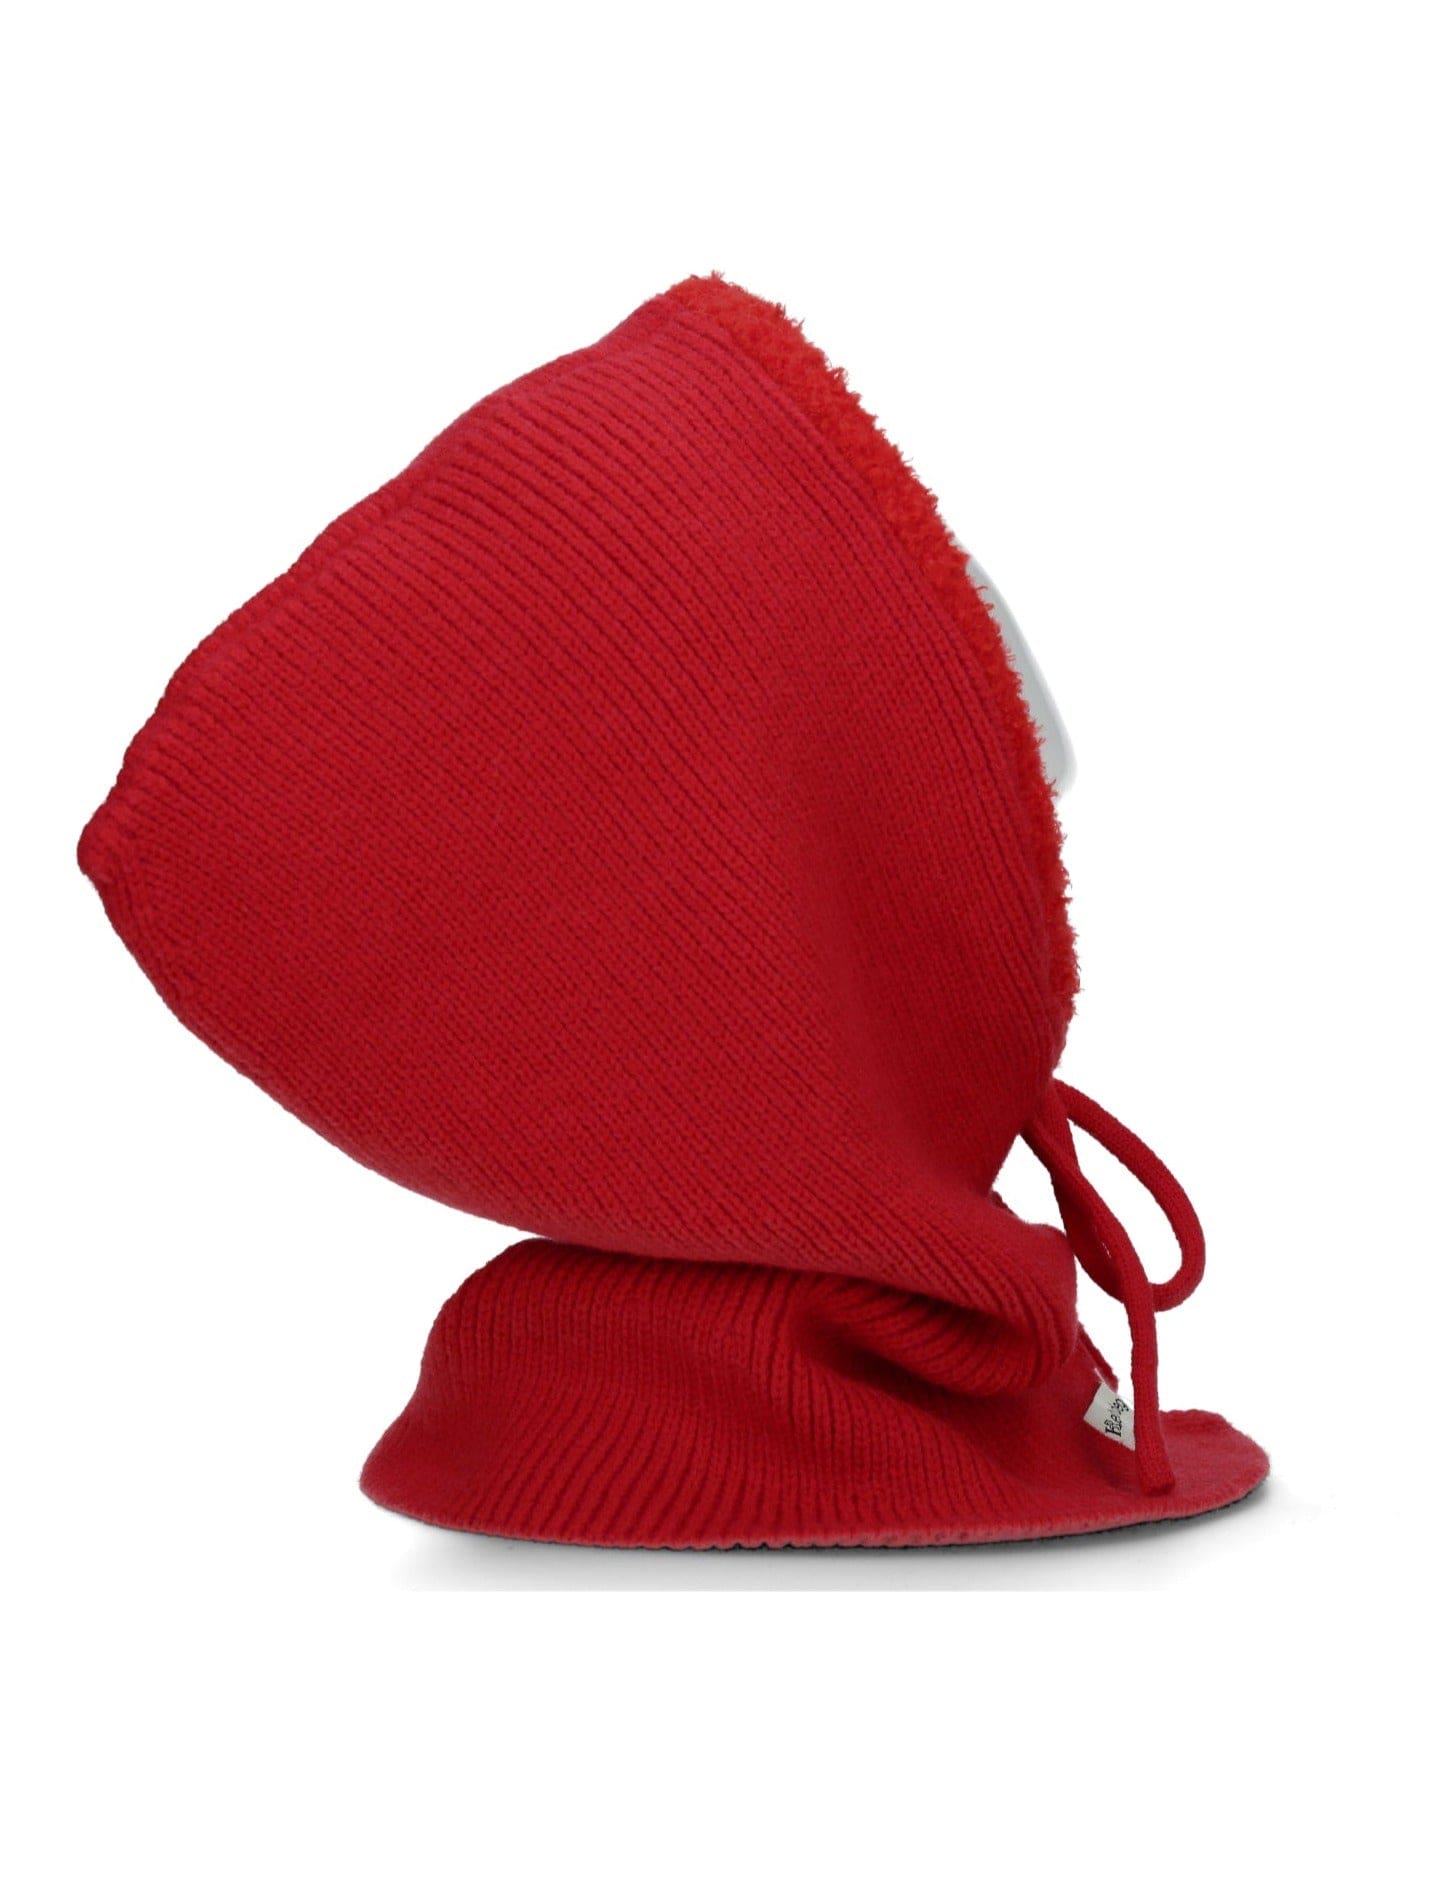 Red riding hood - Hats